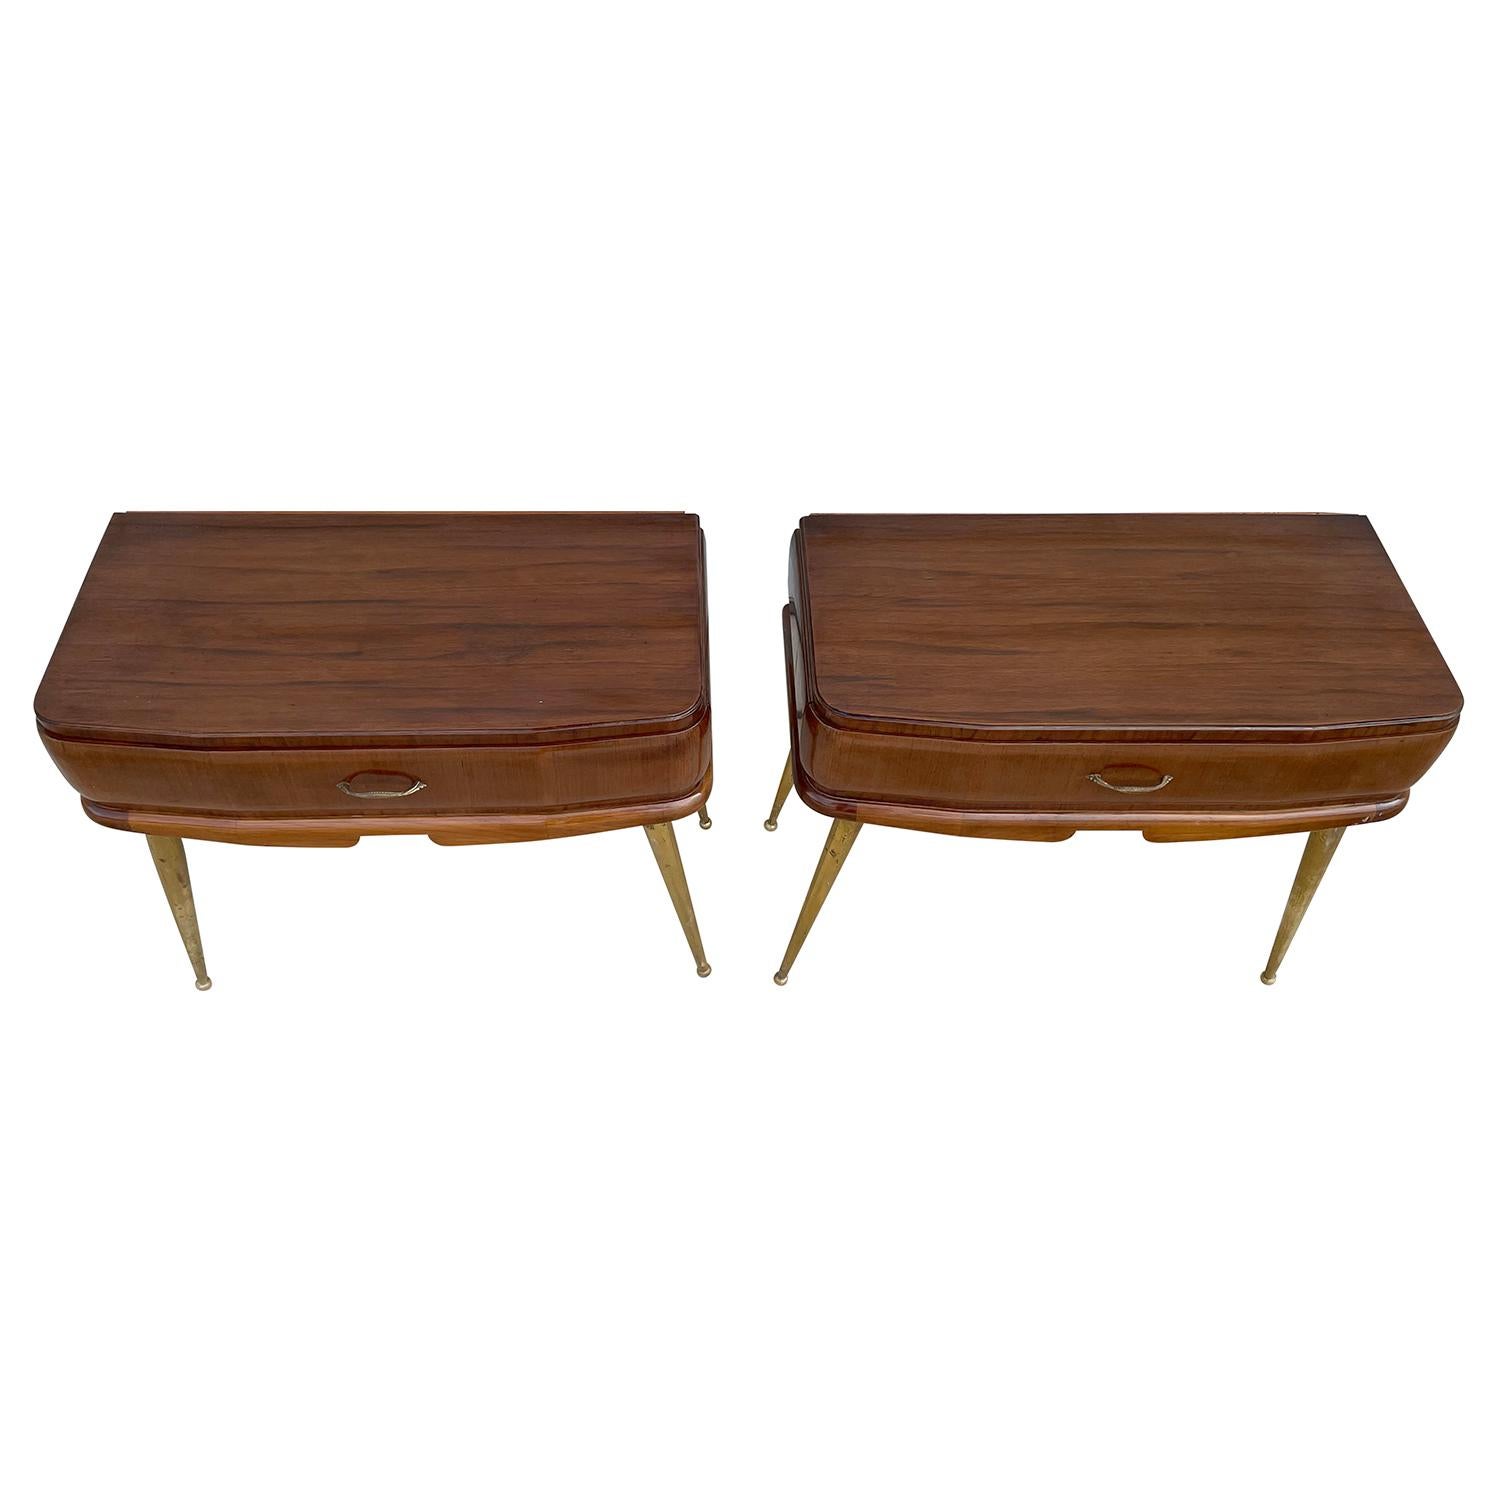 Mid-Century Modern 20th Century Italian Pair of Mahogany Nightstands - Vintage Bedside Tables For Sale